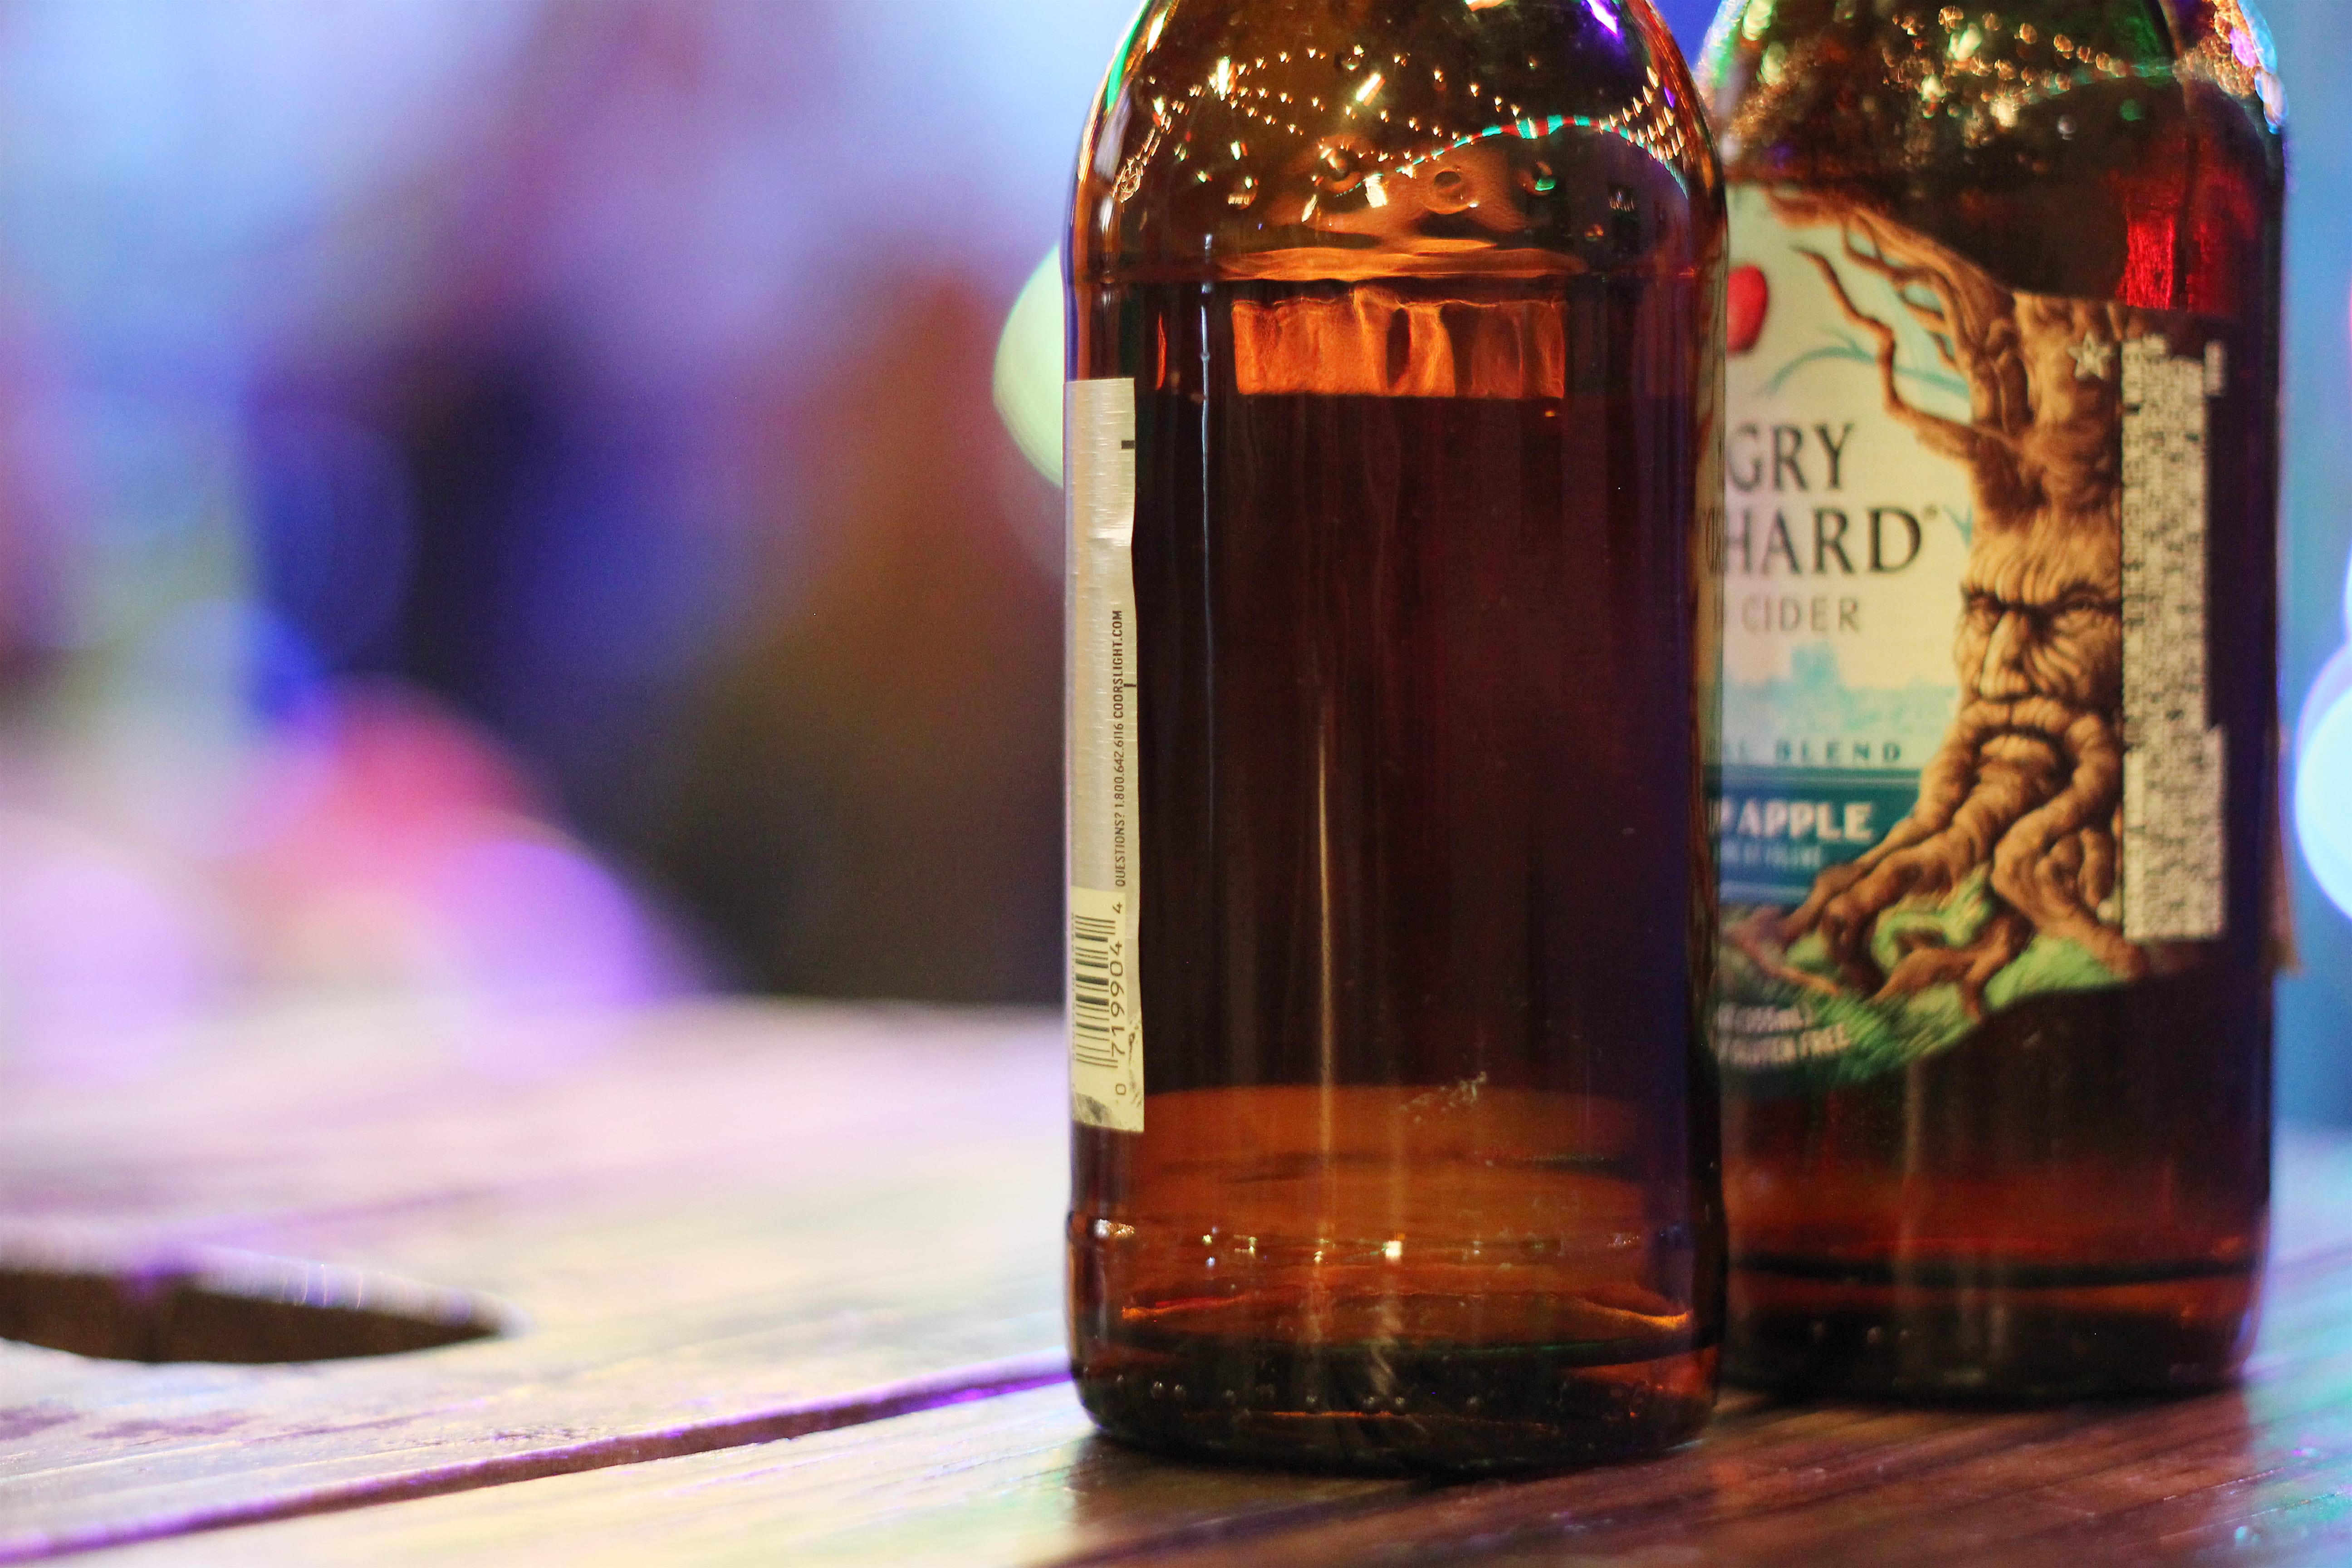 Angry Orchard beer bottles in focus with background blurred